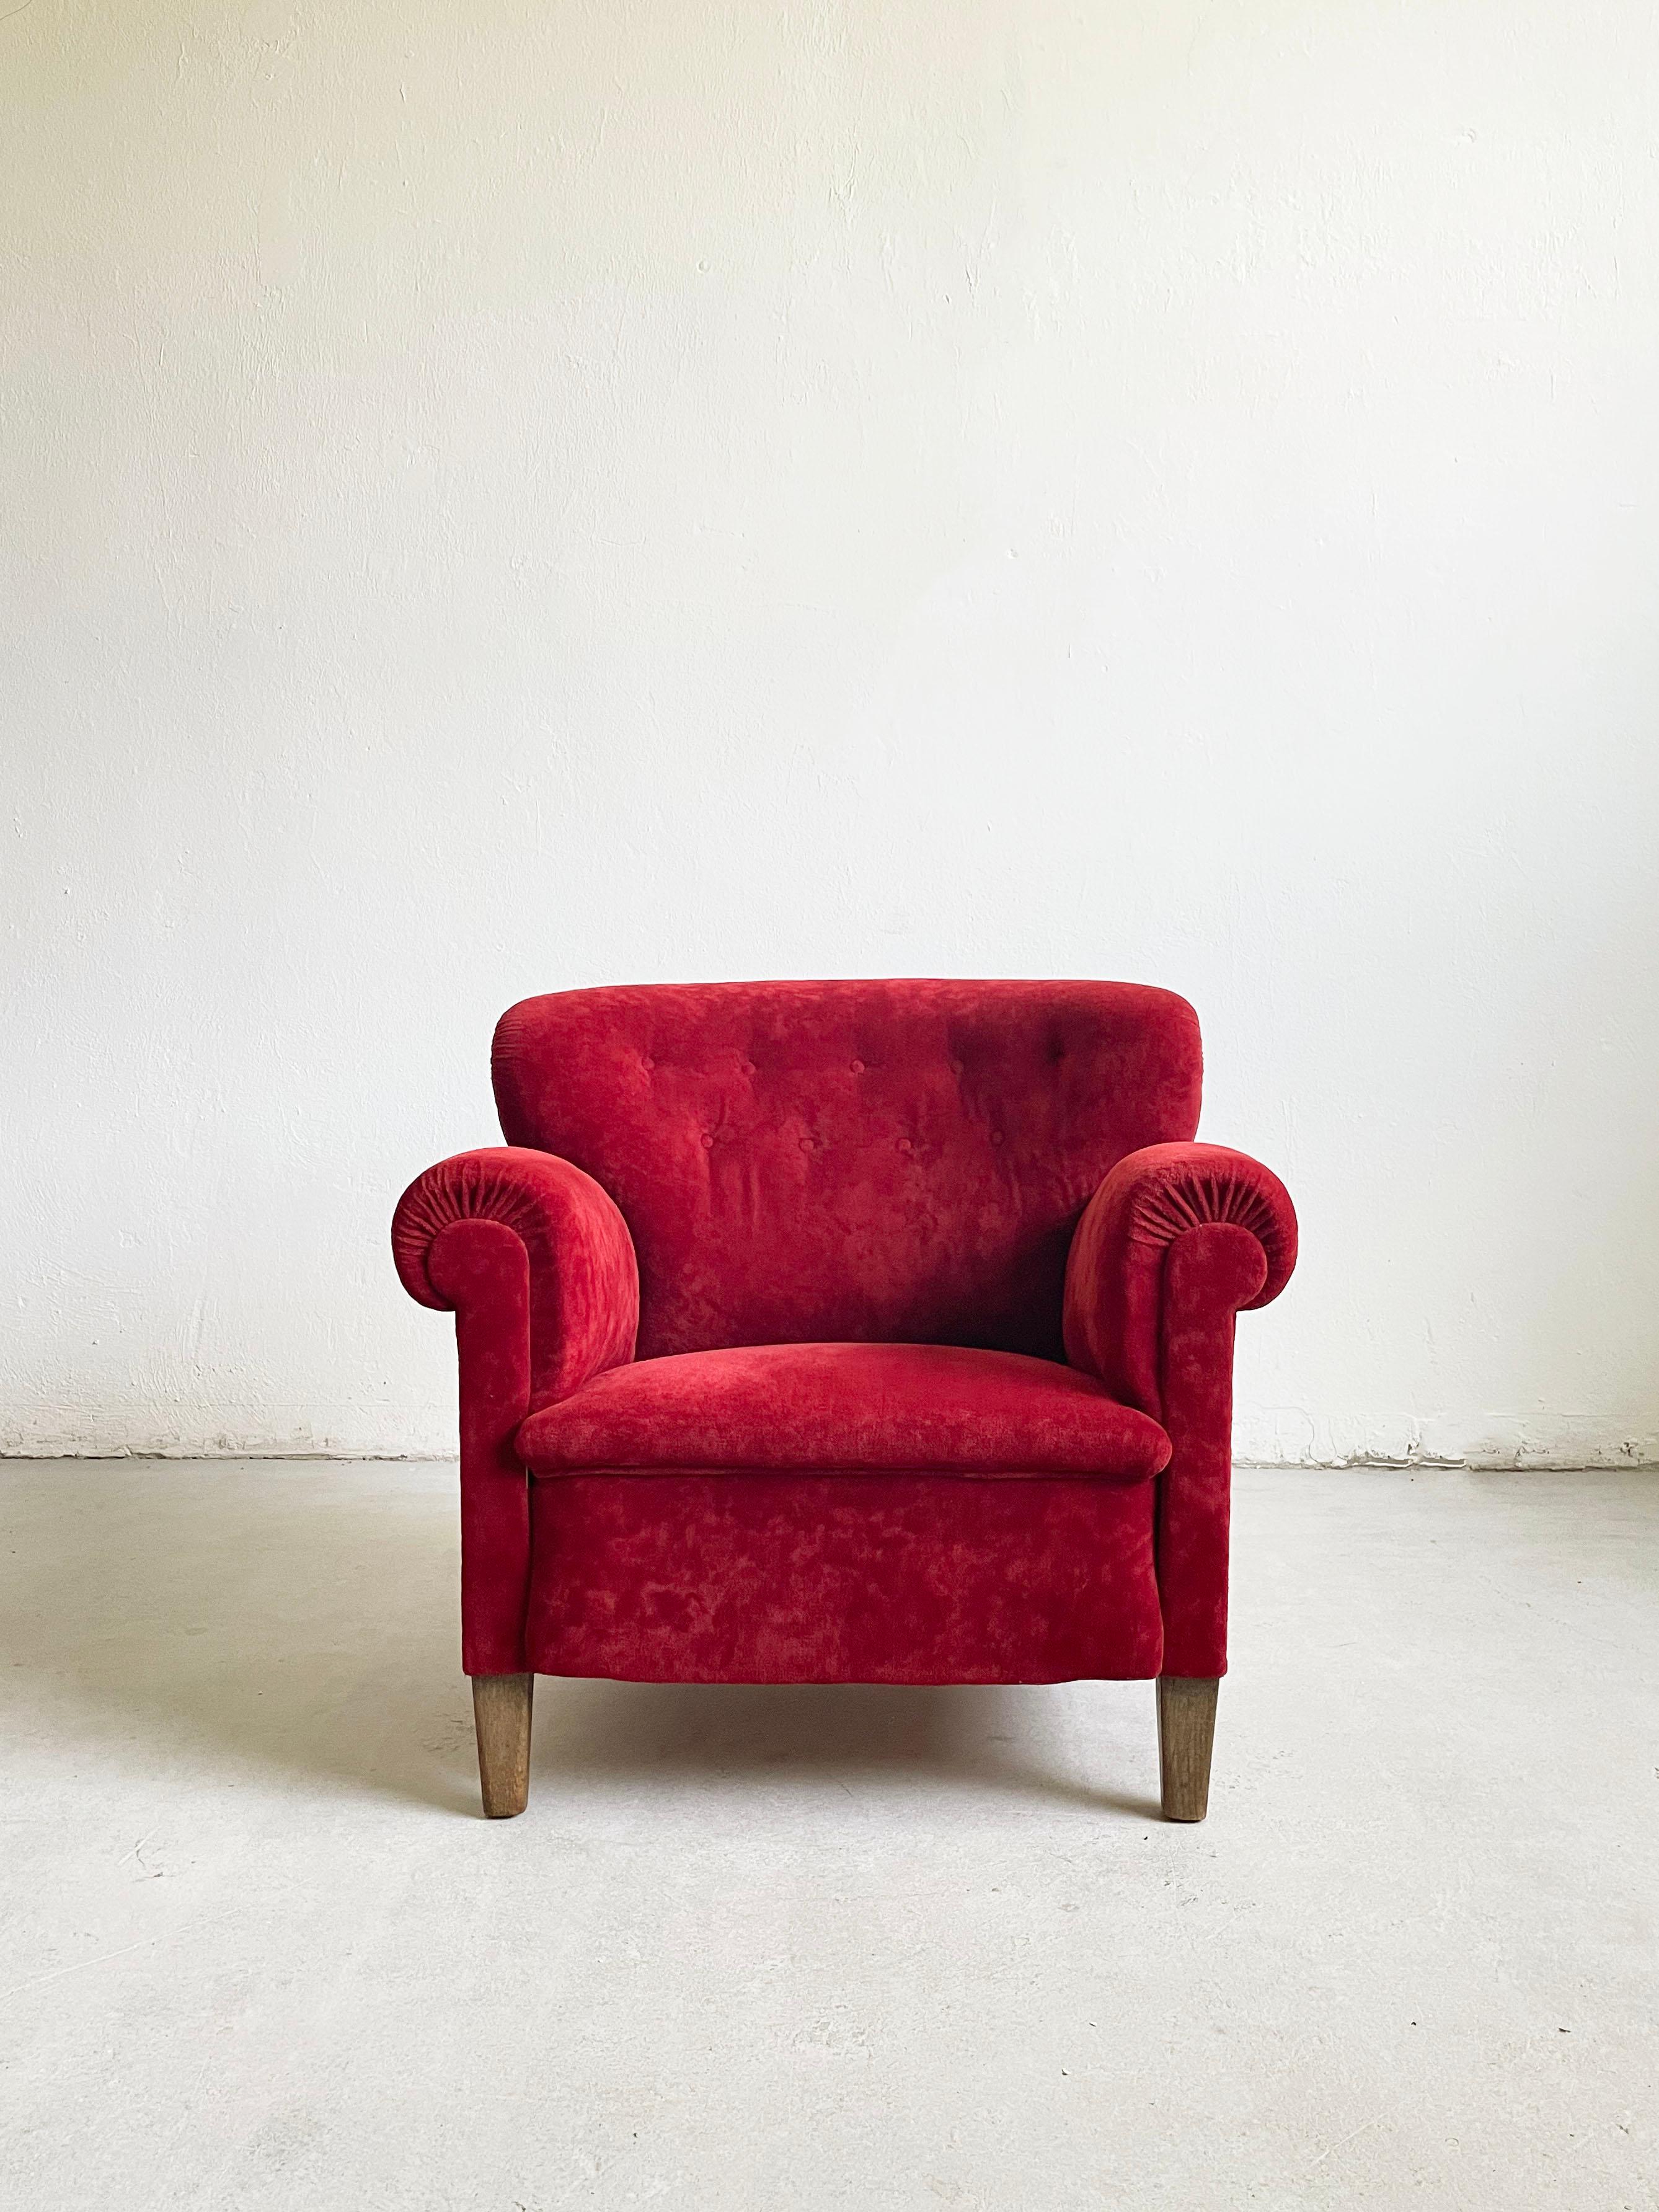 This is a rare find, an original 1950s armchair, hardly used and in almost pristine original condition.

It was handcrafted in the late 1950's in Scandinavia, possibly in Danmark.

It has a sturdy wooden frame entirely upholstered in a crimson or